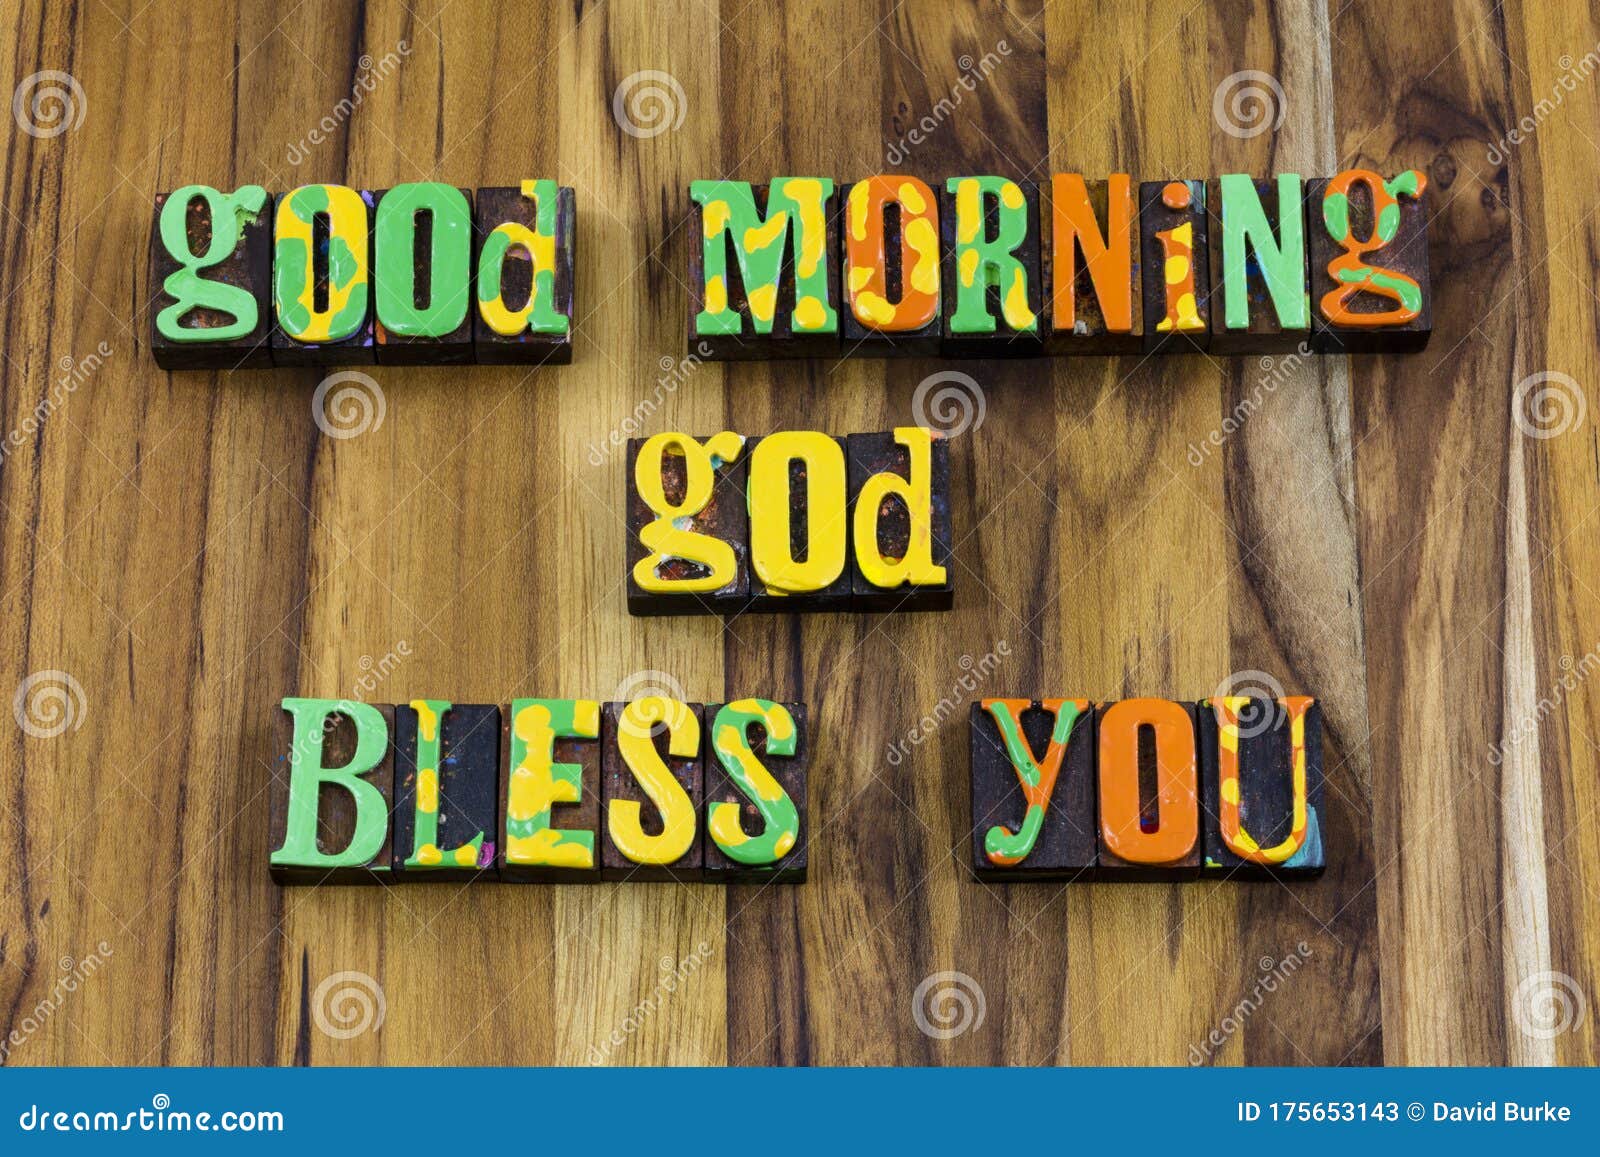 Good morning god bless you stock image. Image of typography ...